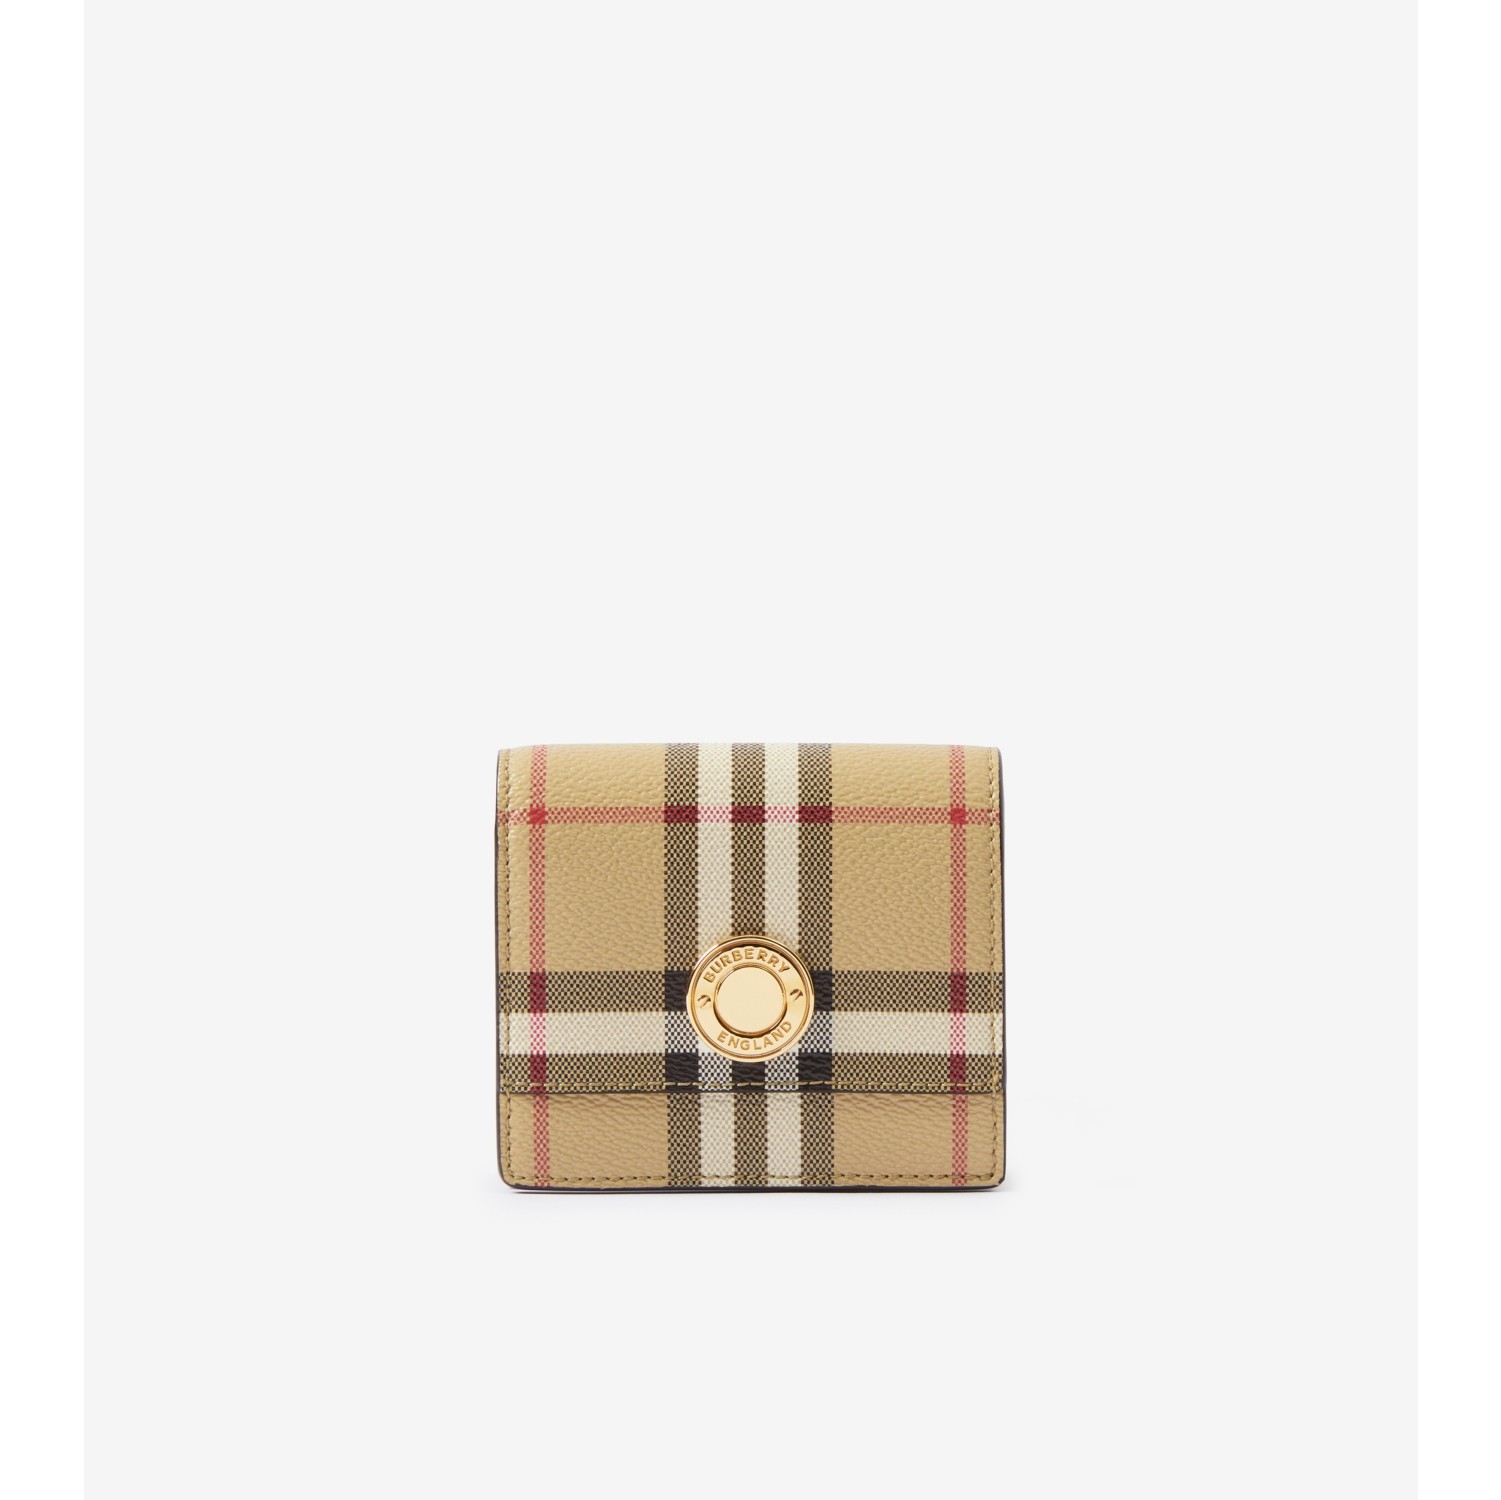 Burberry Wallets for Women - Vestiaire Collective